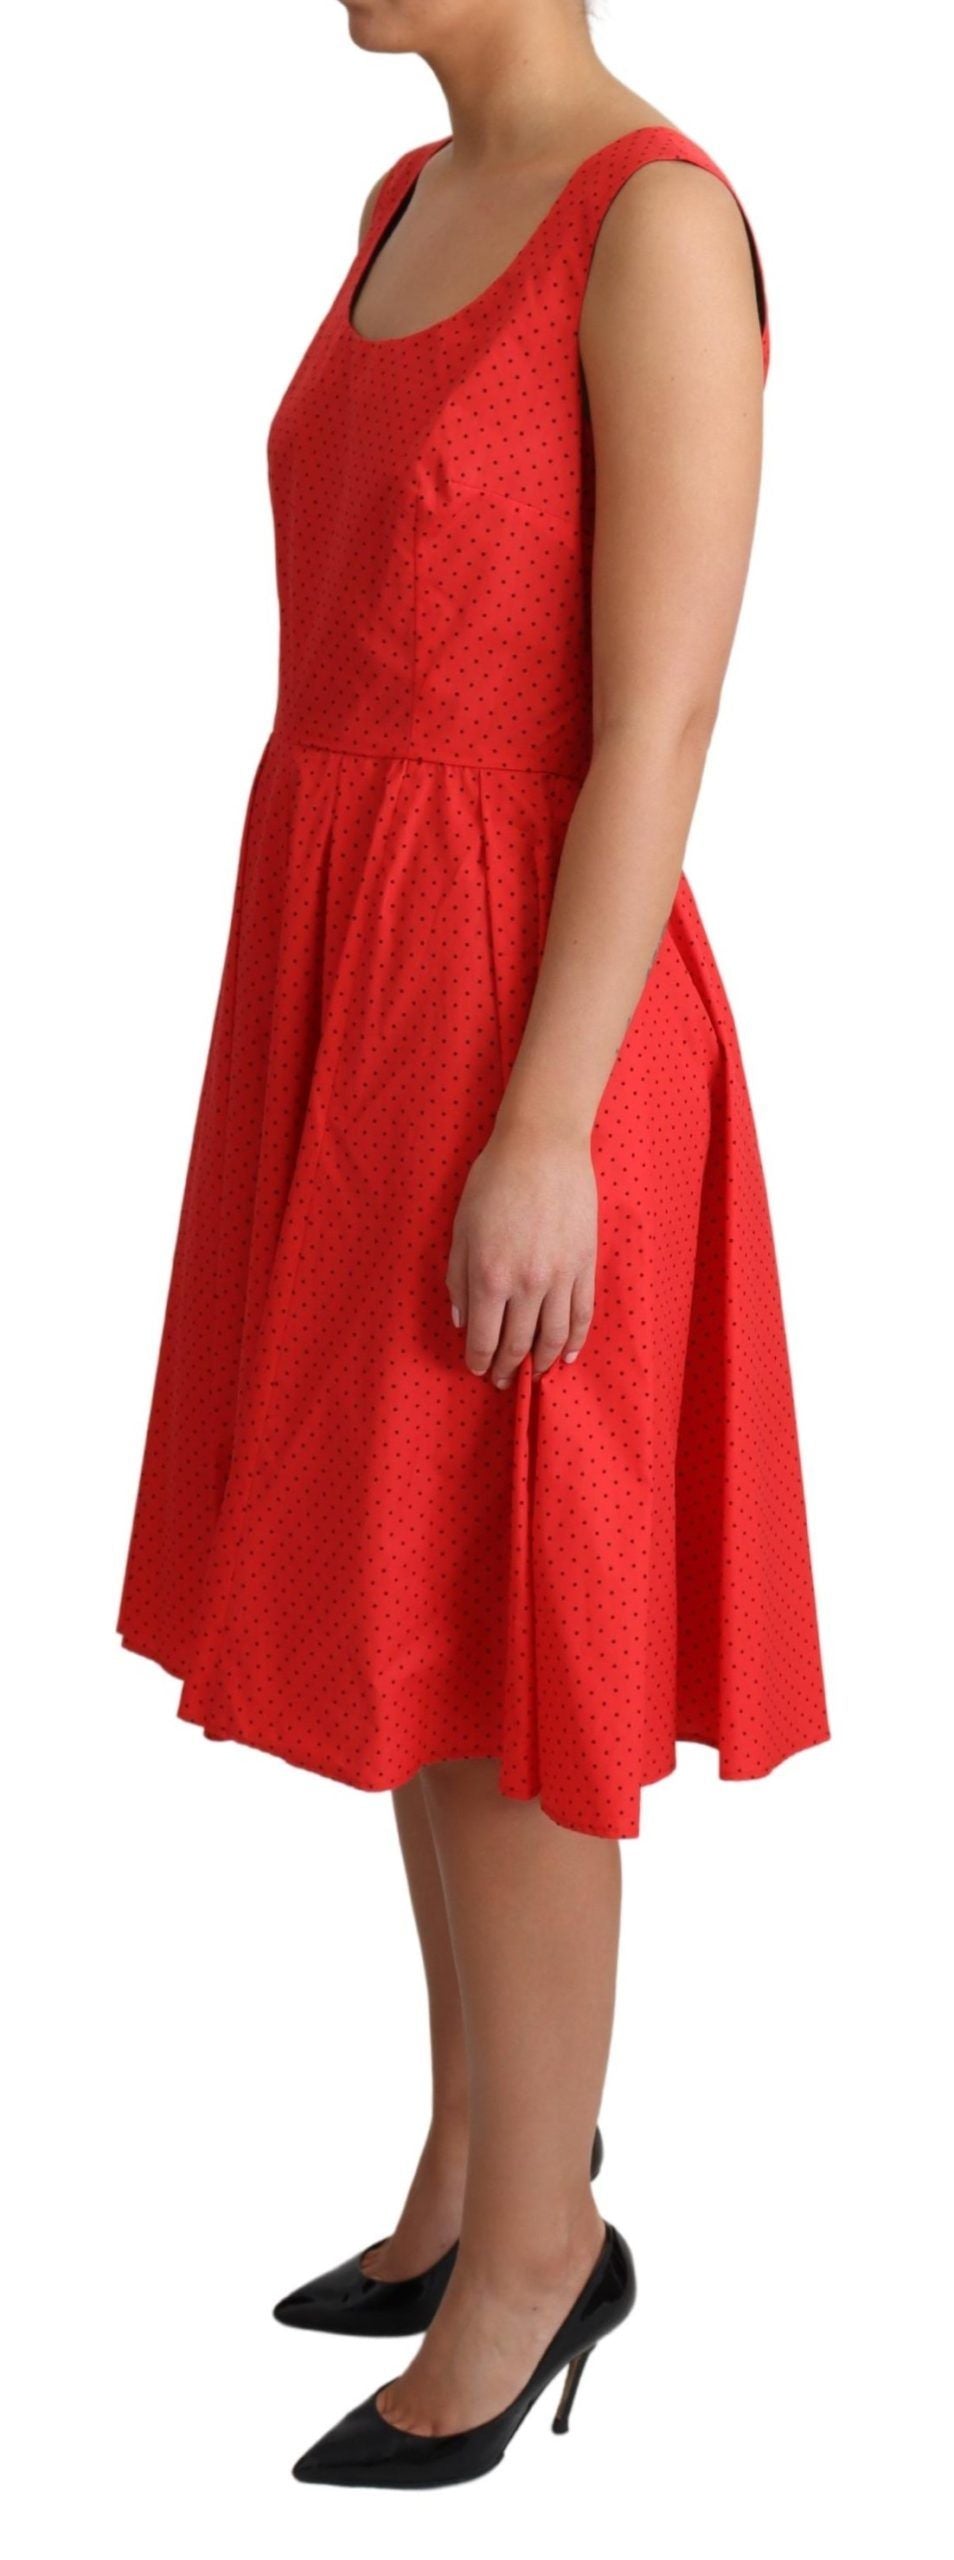 Dolce & Gabbana Red Polka Dotted Cotton A-Line  Dress